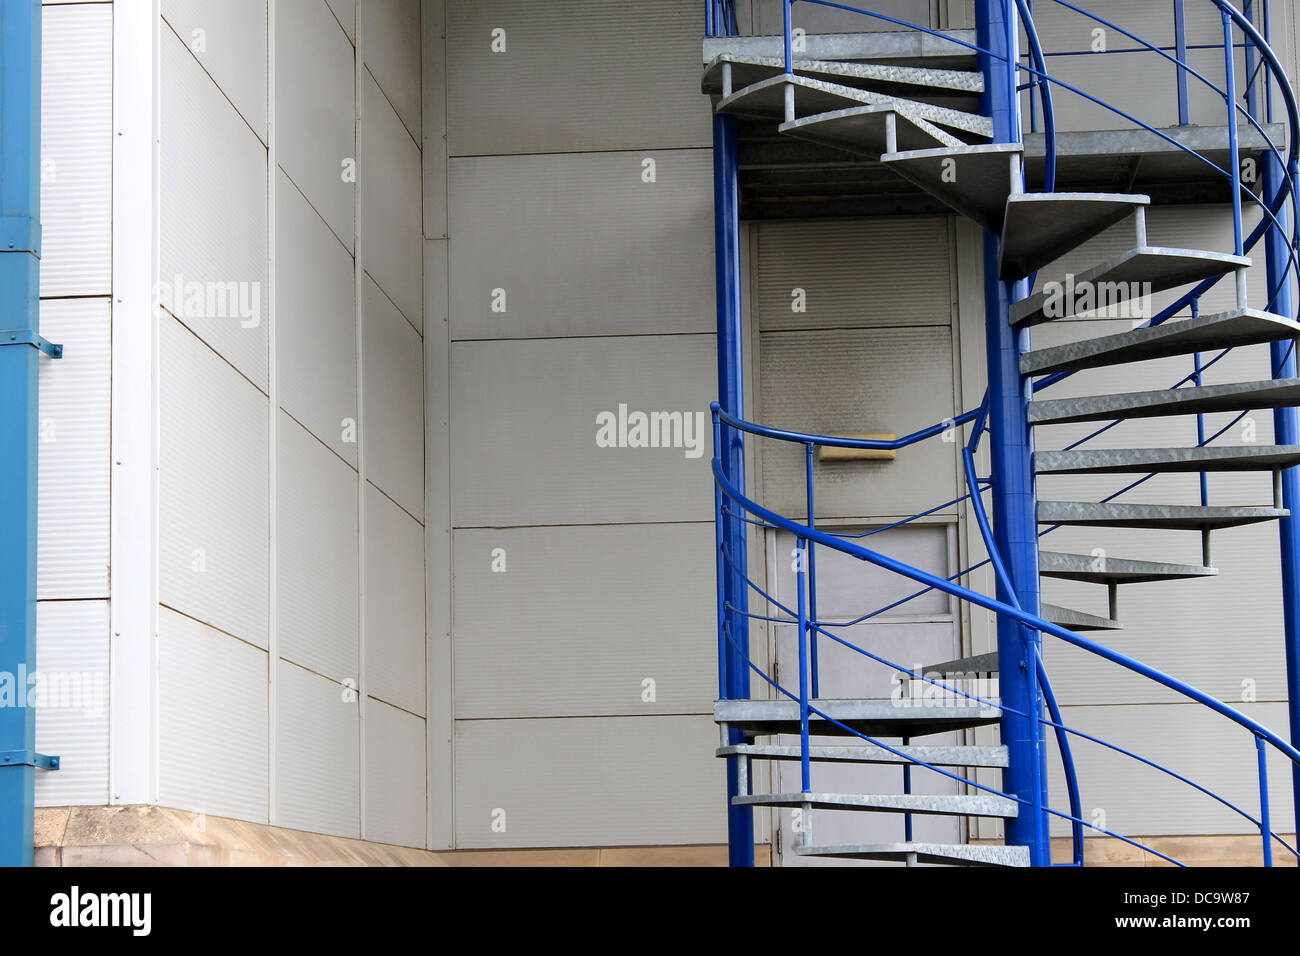 Exterior of spiral emergency exit staircase on modern building. Stock Photo